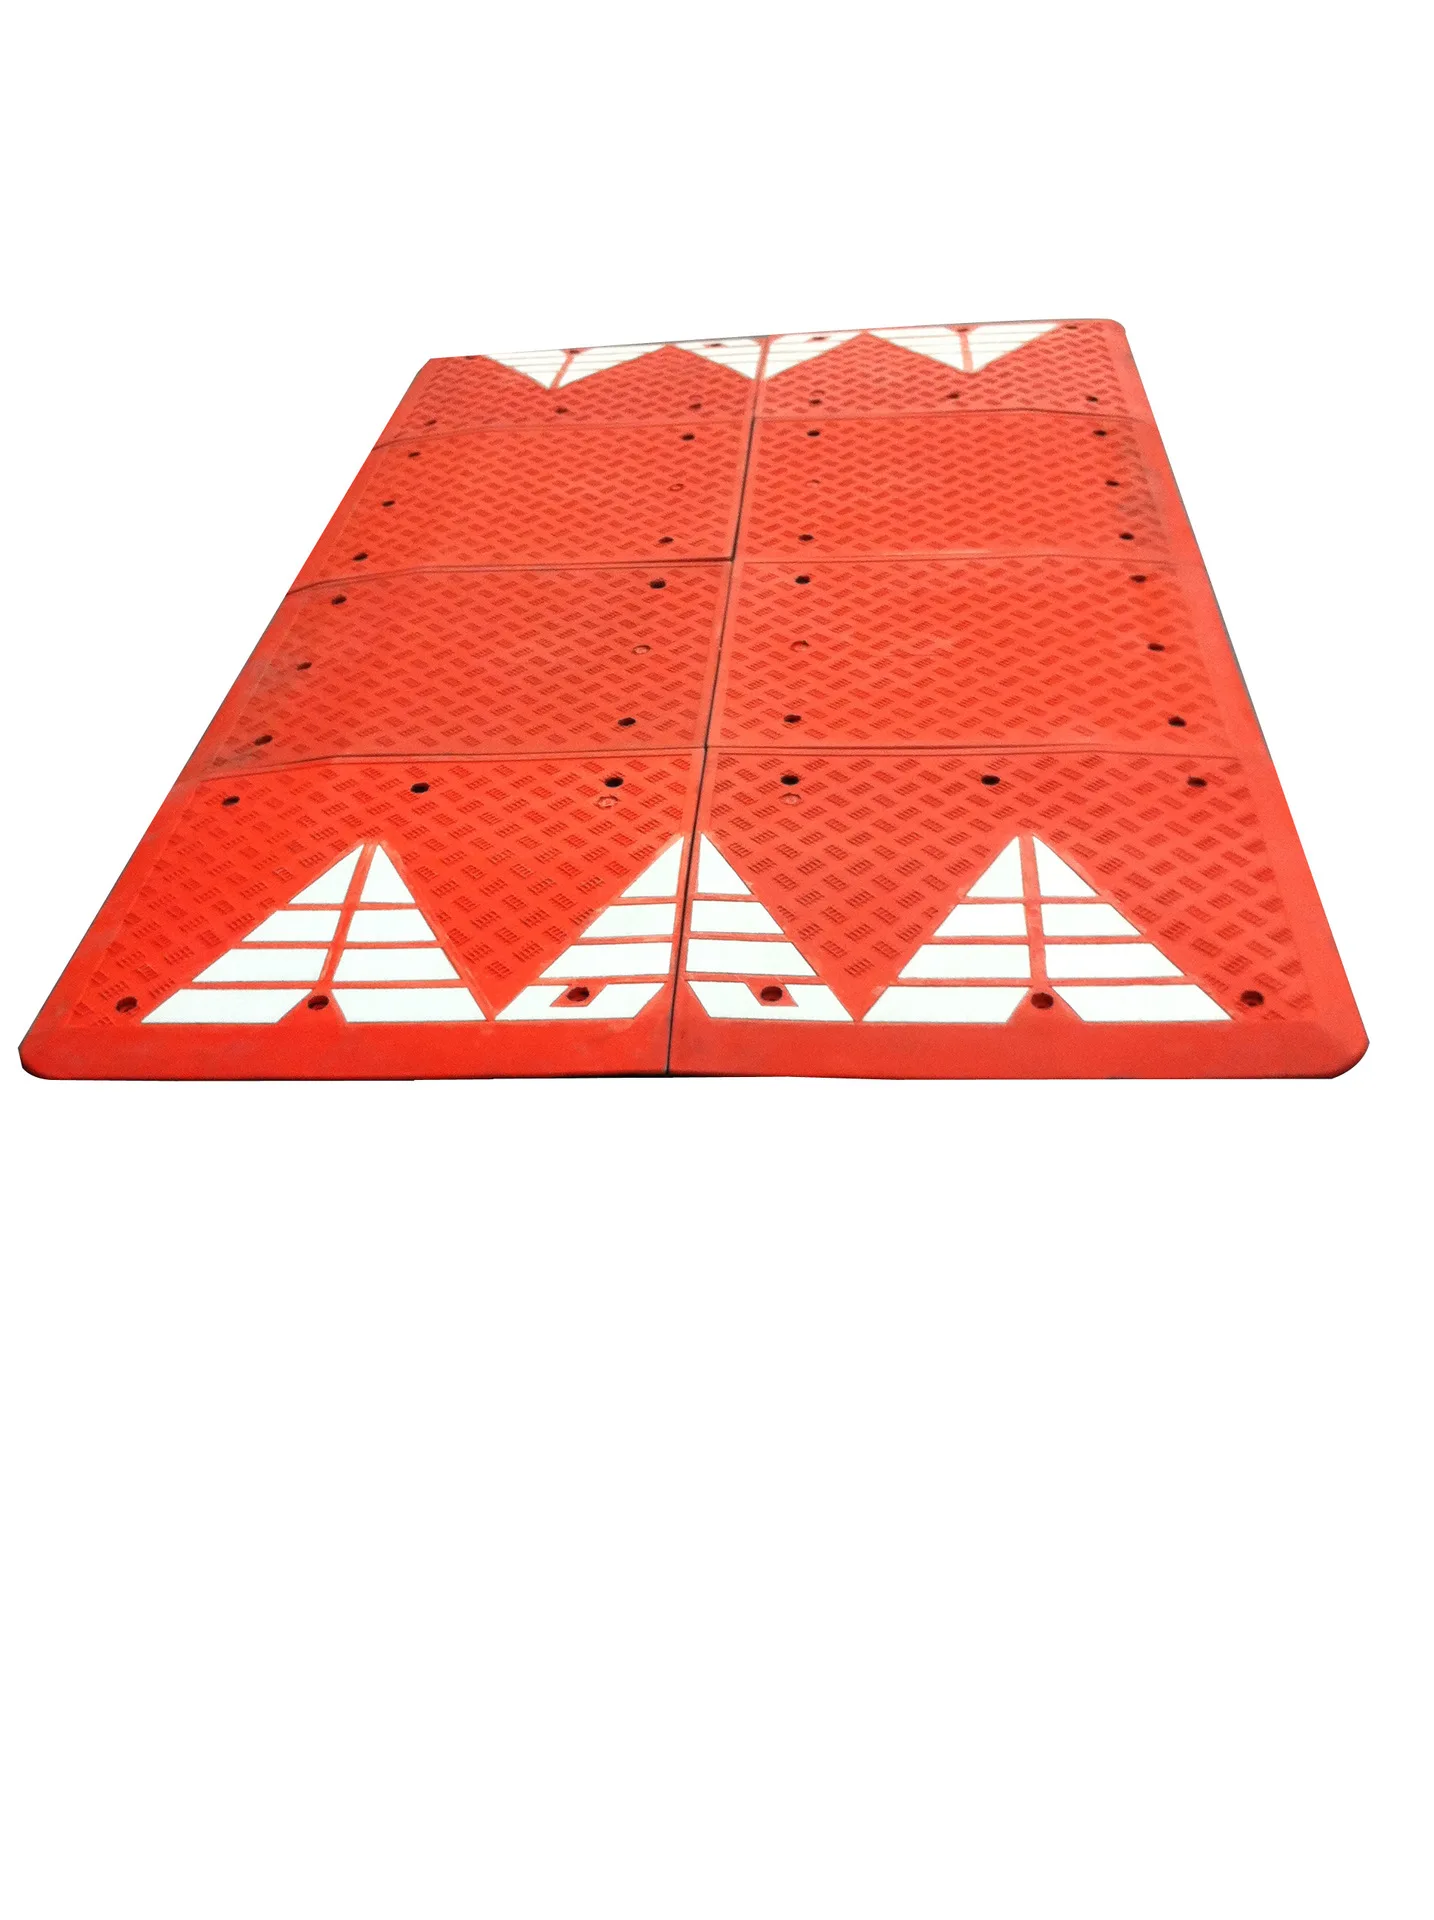 SC-SH29  6pcs into 1set Red  Ruber Speed Bump Cushion  for  Plastic speed Bump  with good quality Roadway saftey